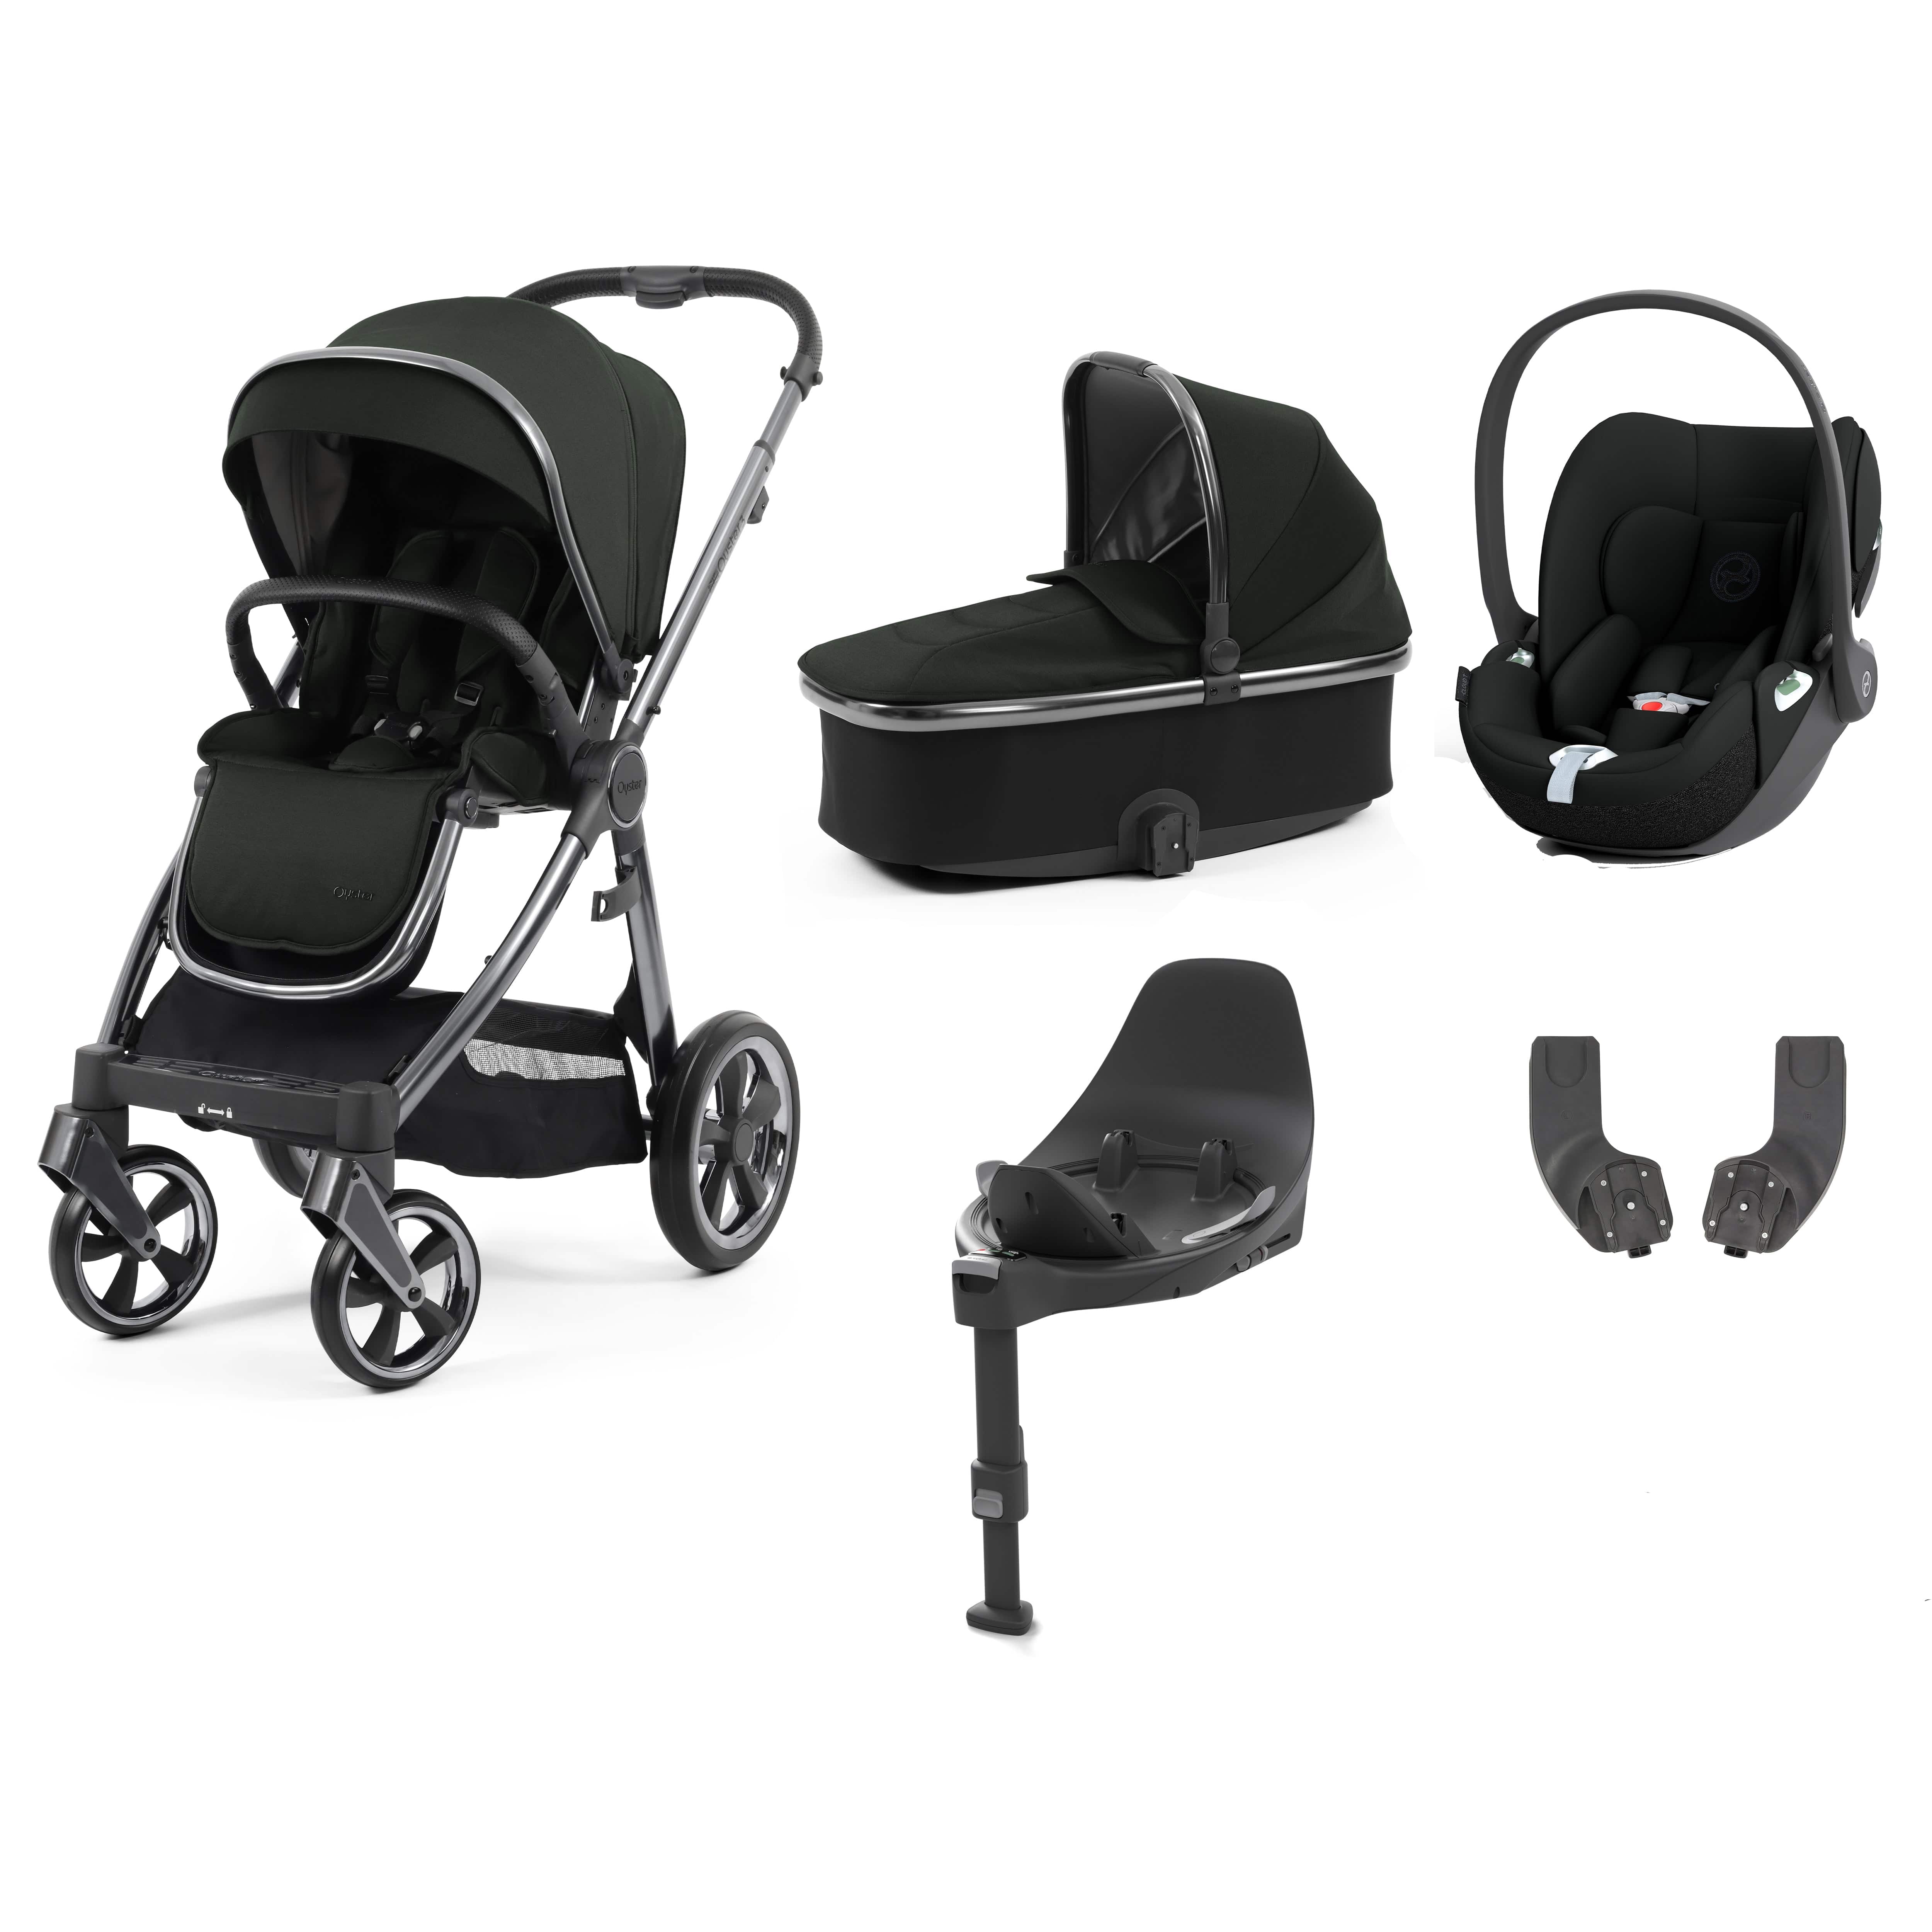 Babystyle Oyster 3 Essential Bundle with Car Seat in Black Olive Travel Systems